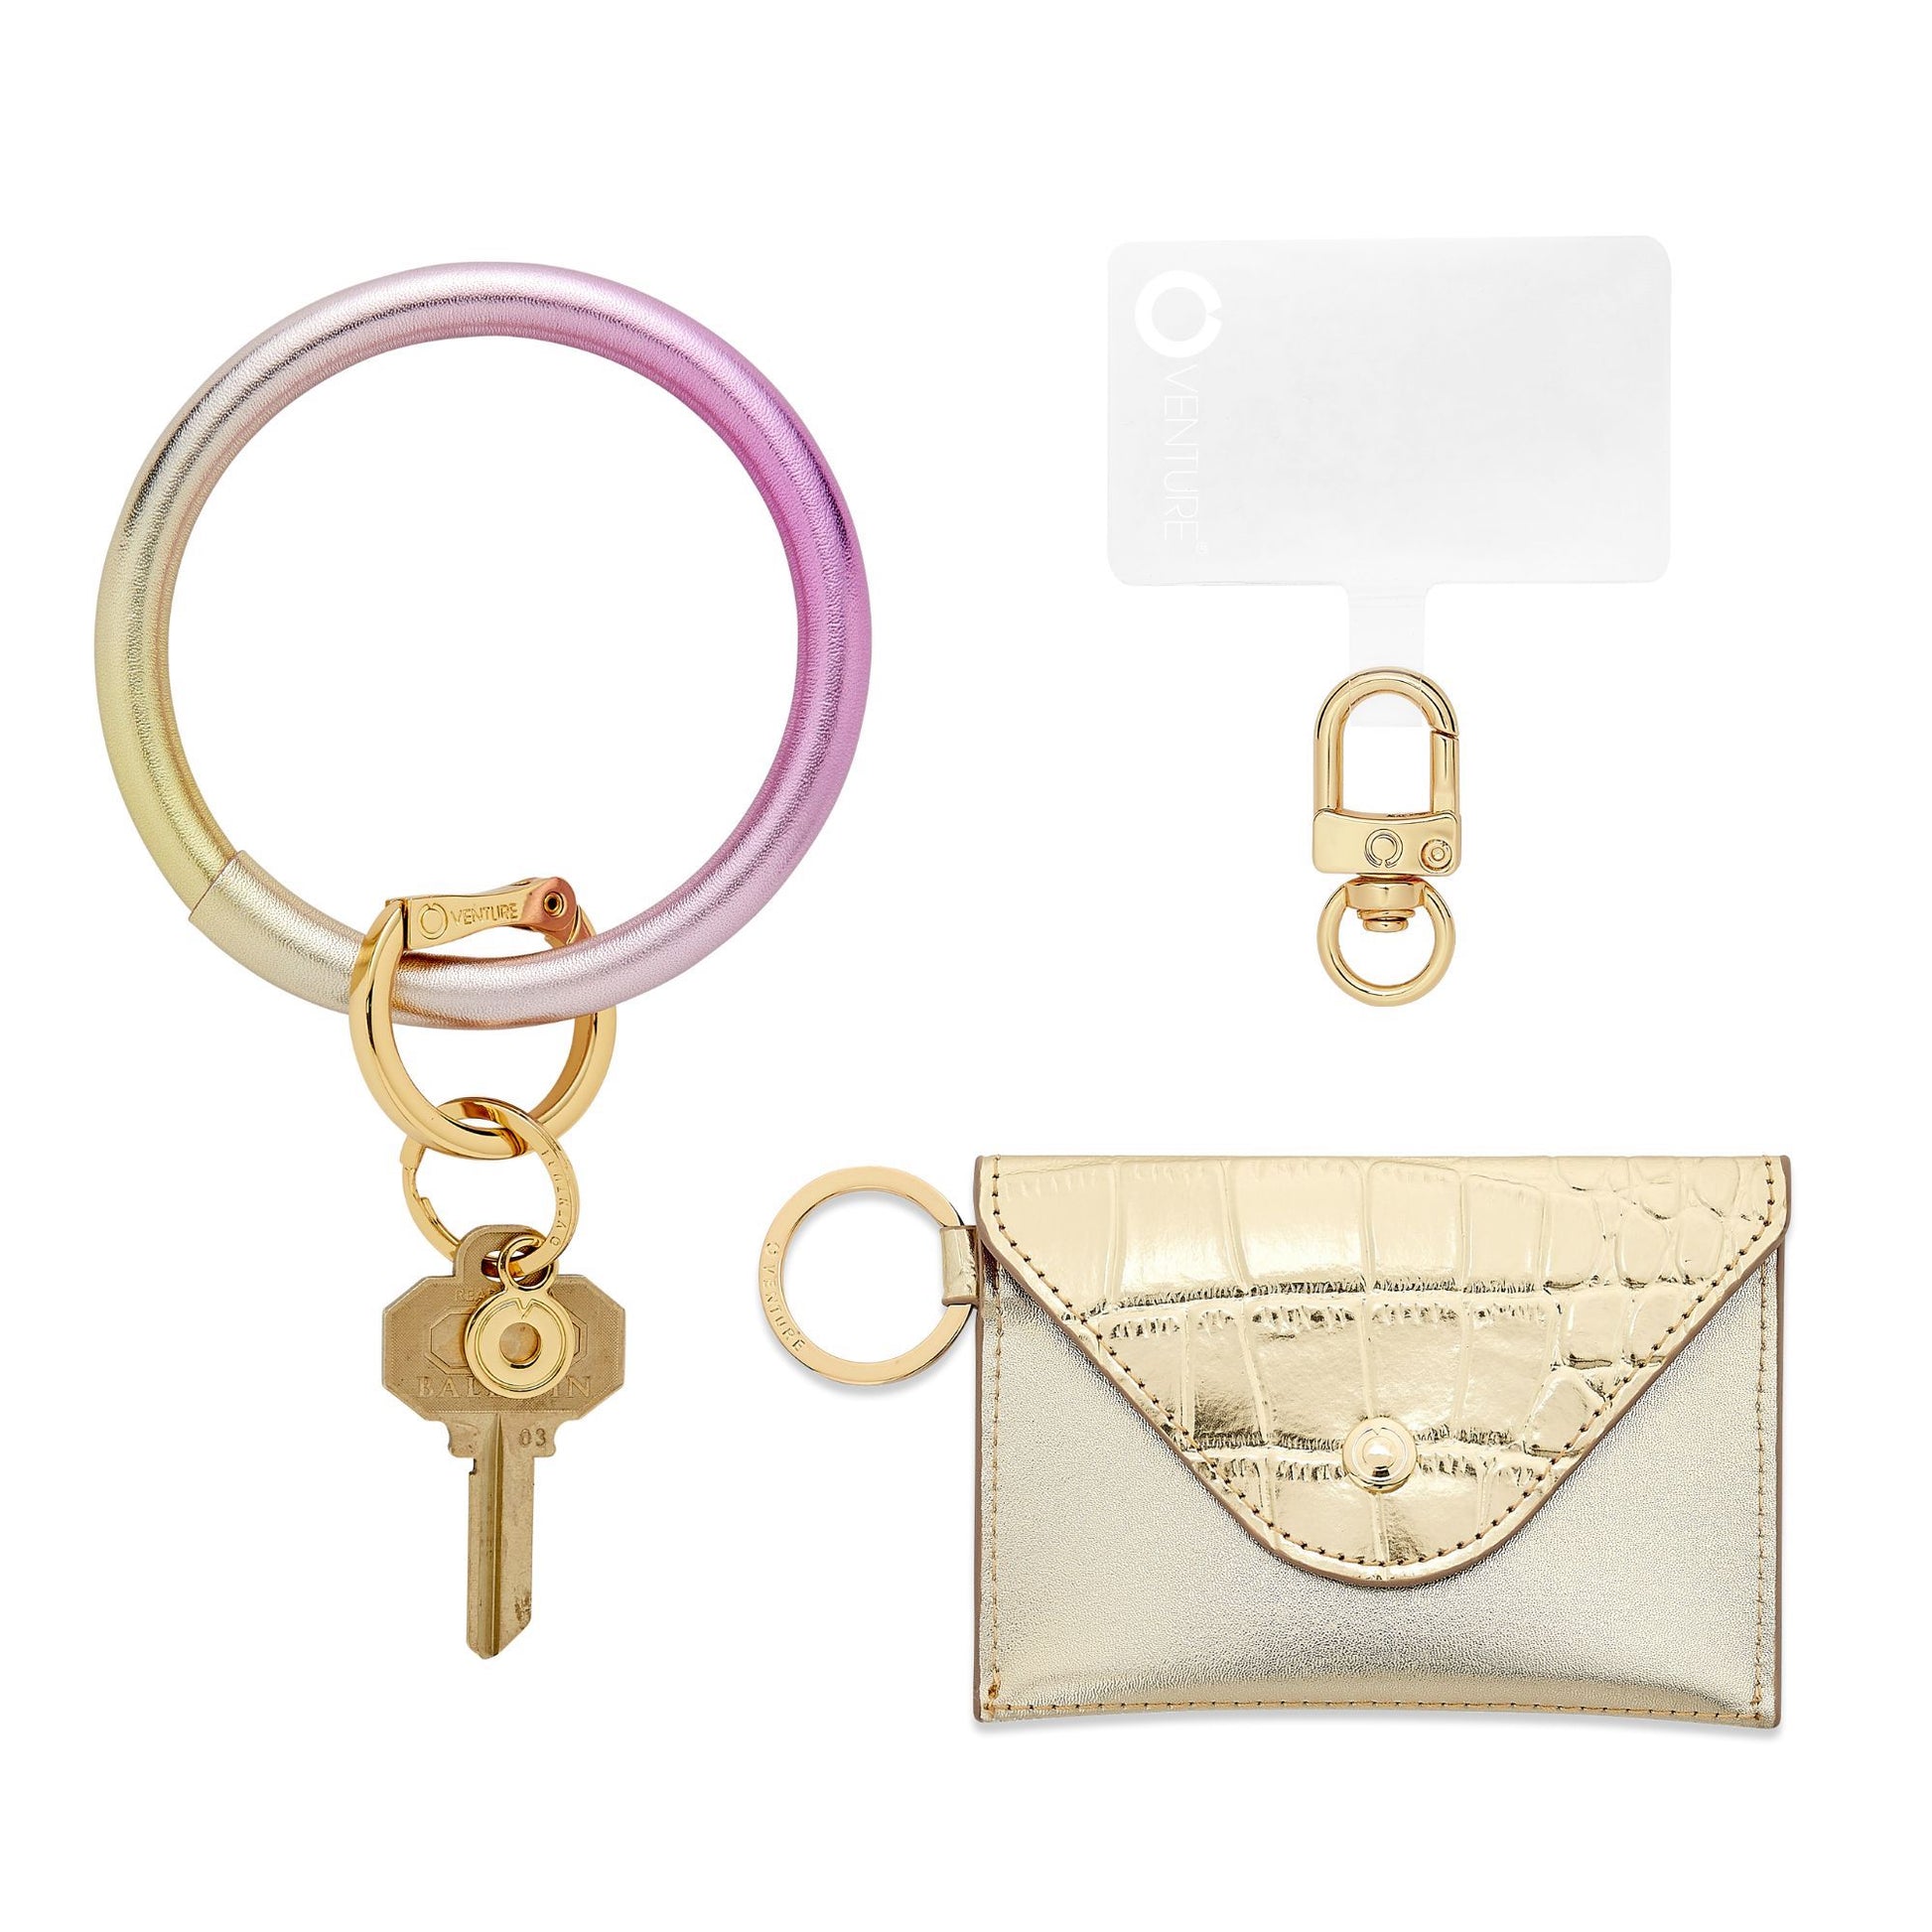 Three in one set which includes Big O Keyring in pink to gold ombre leather with gold mini envelope and phone connector